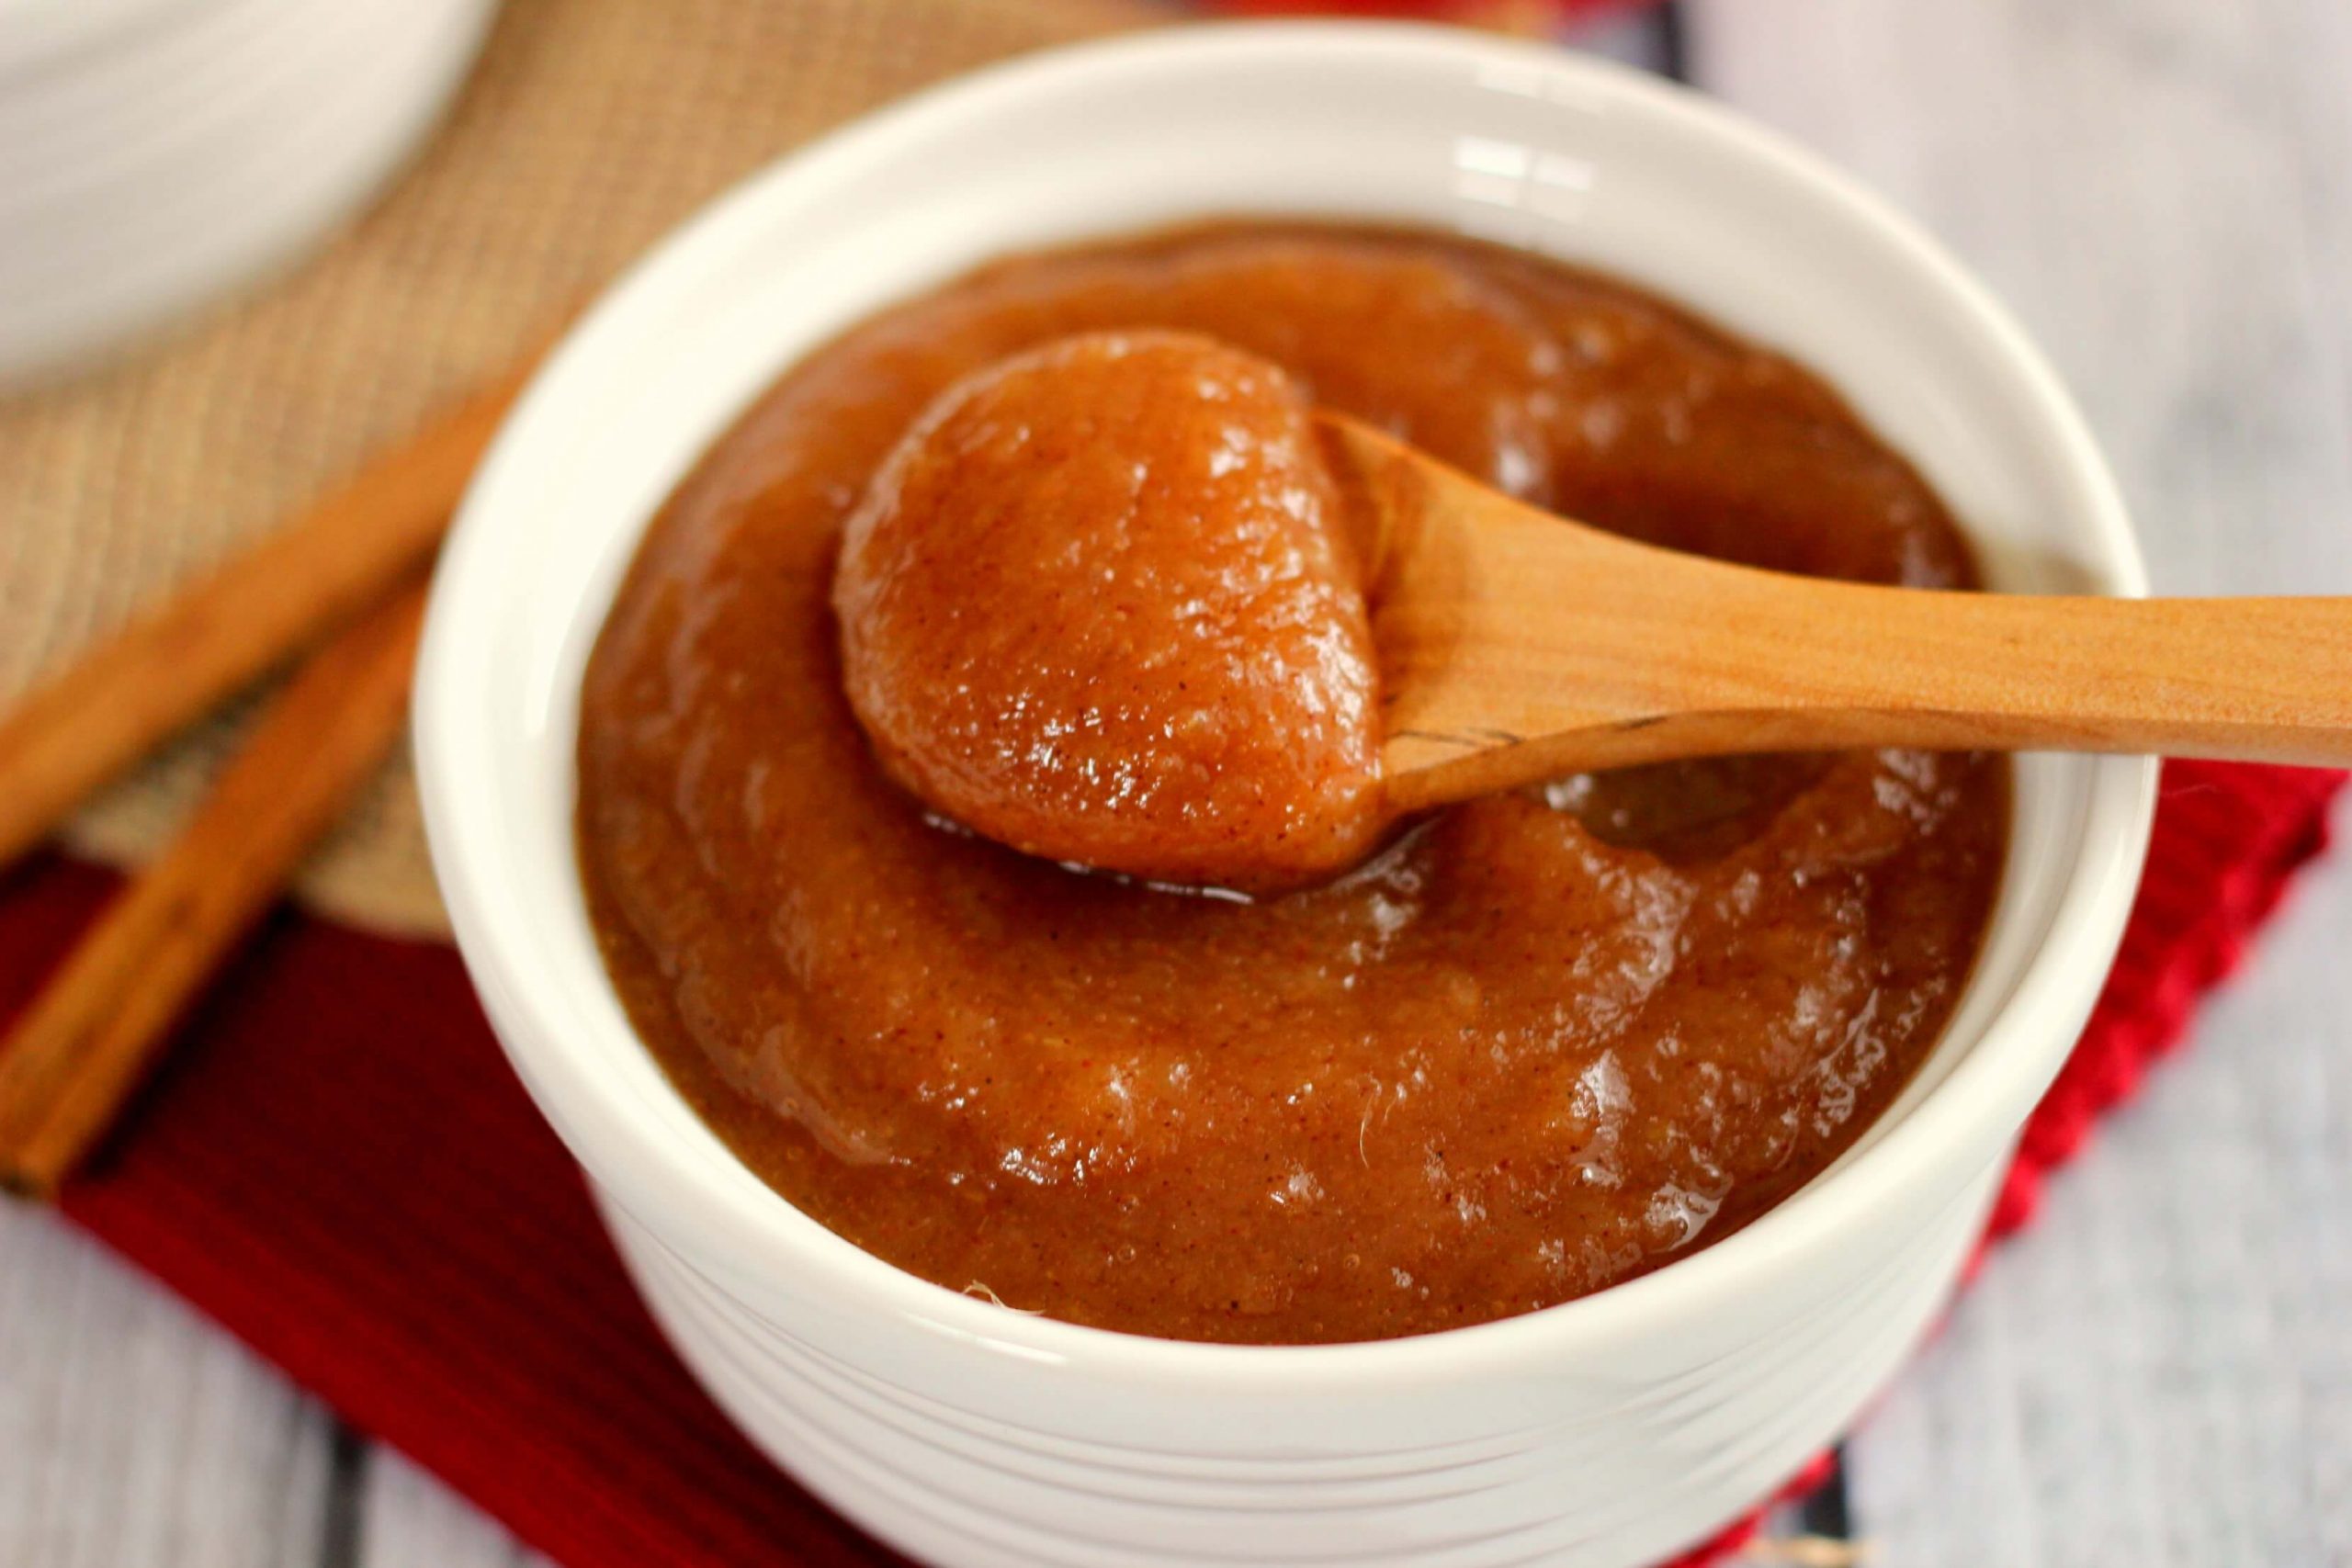 This Cinnamon Applesauce features fresh apples, cozy flavors, and comes together with minimal prep work.